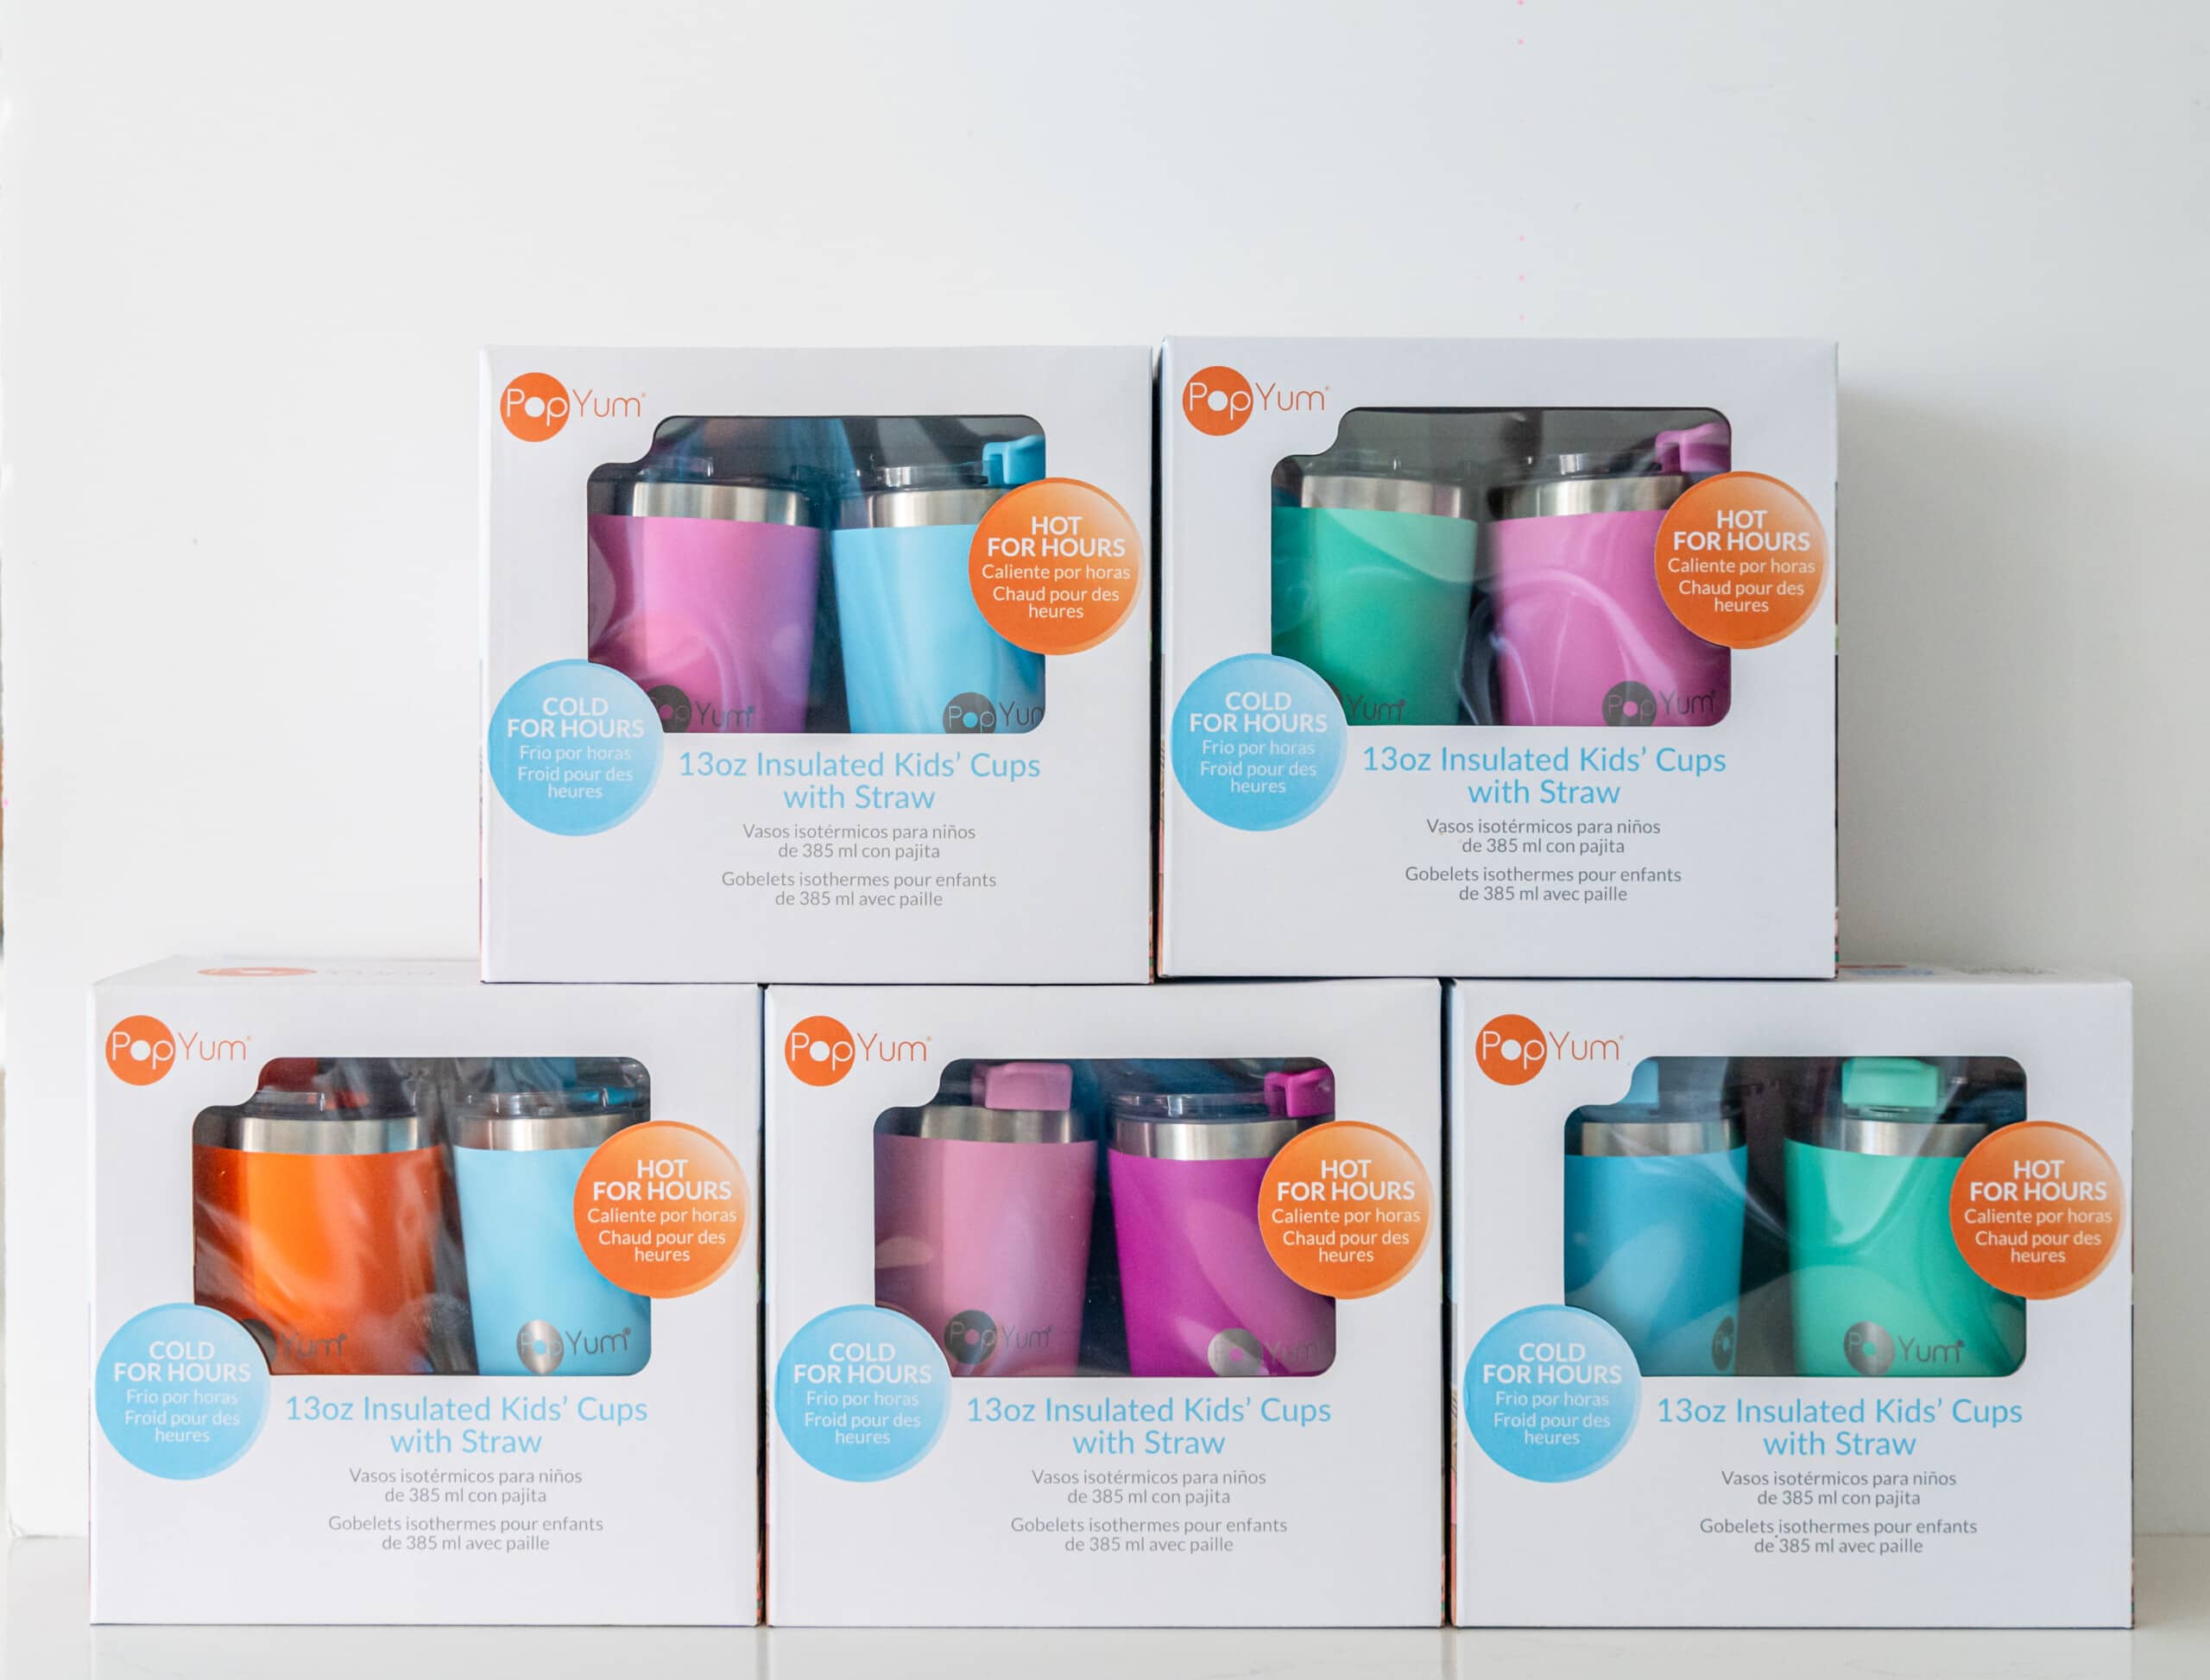 PopYum's NEW Insulated Kids' Cups: Versatile and Convenient! - Baby Chick